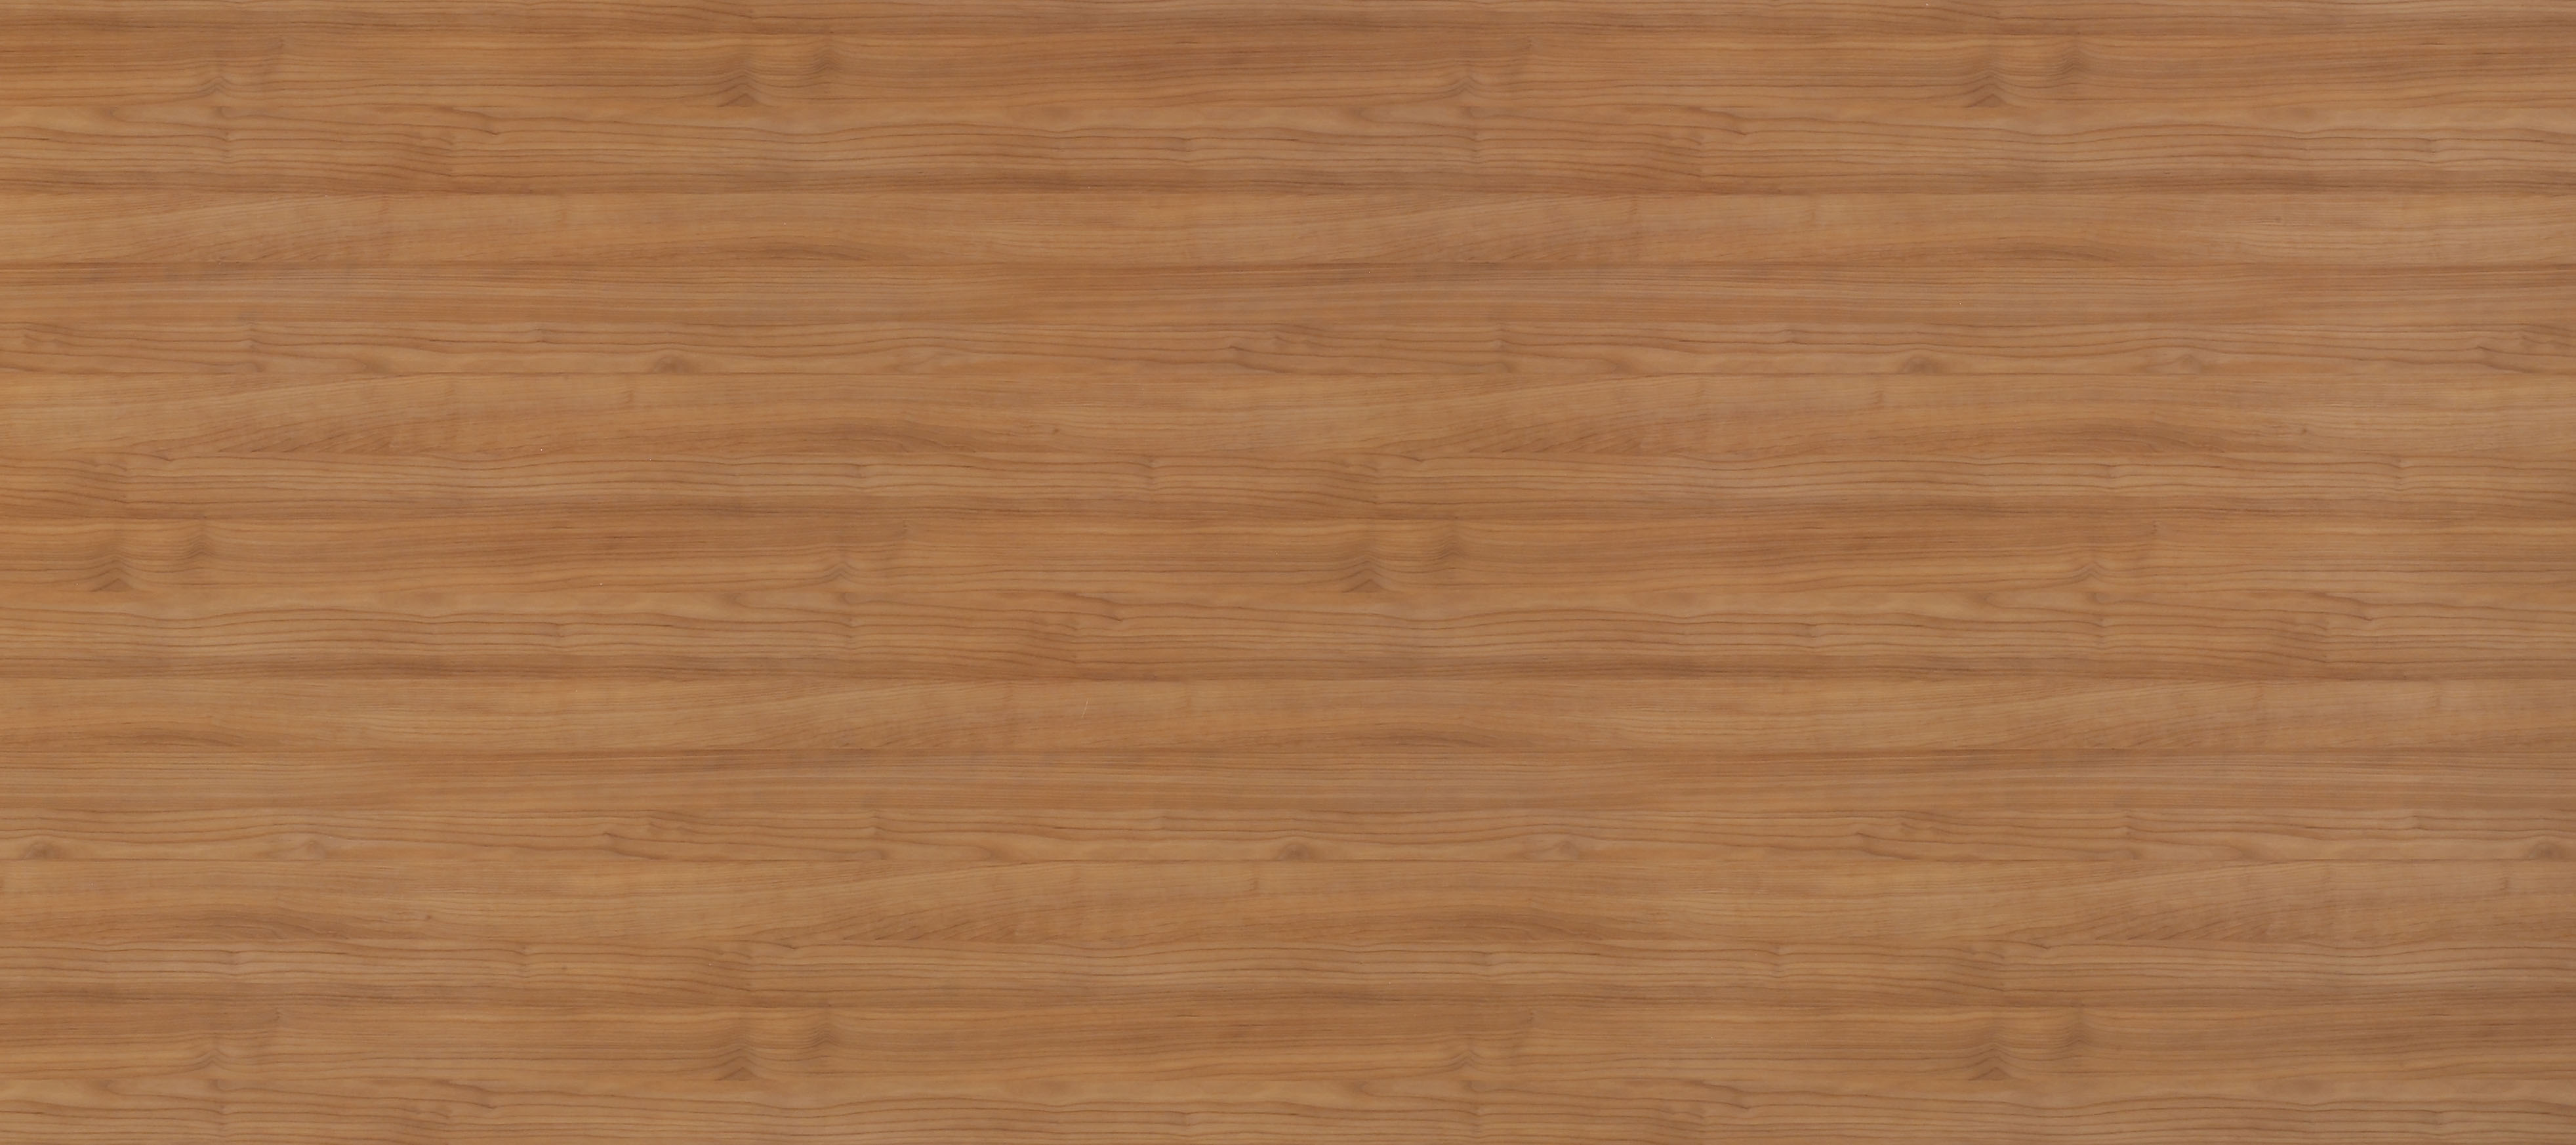 Texture wood, free download, photo, download wood texture, background